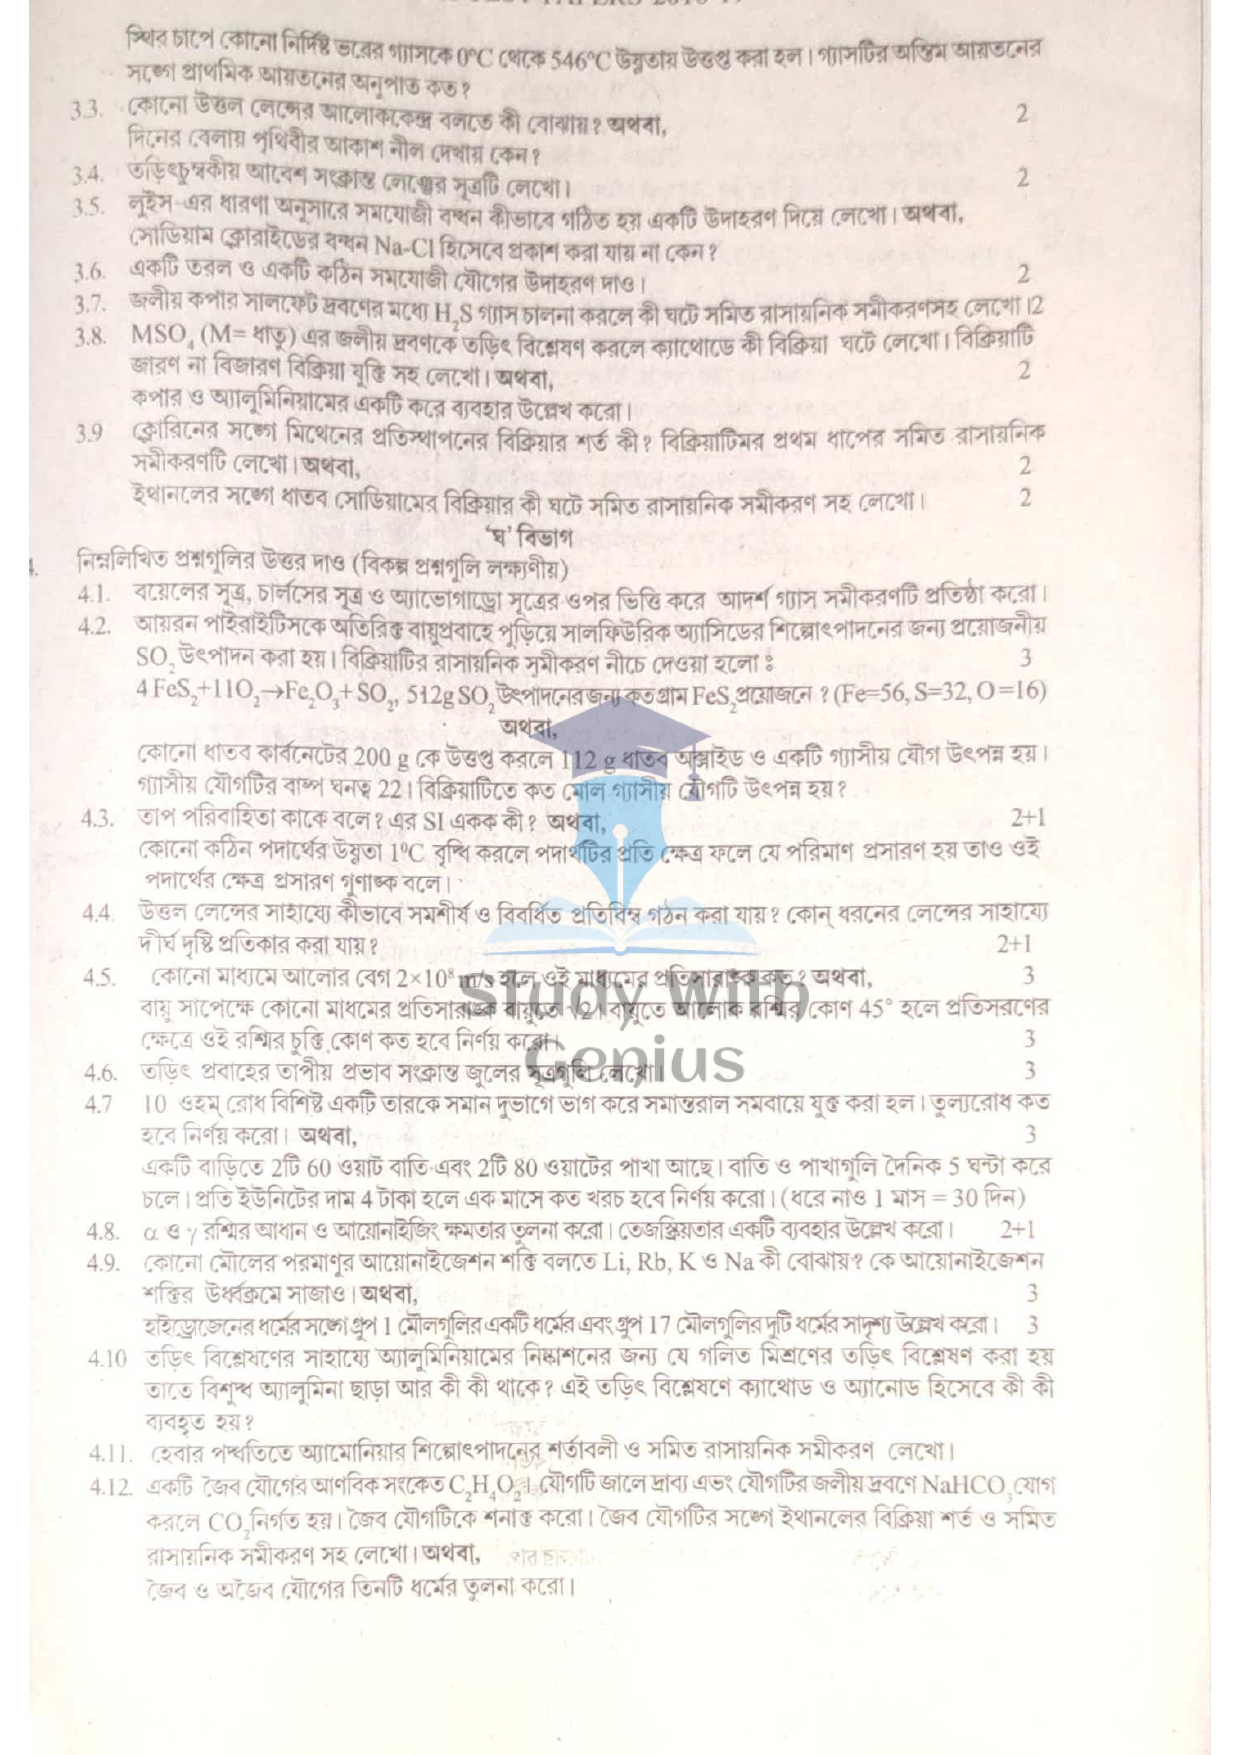 WBBSE Madhyamik Physical Science Subject Question Papers Bengali Medium 2018